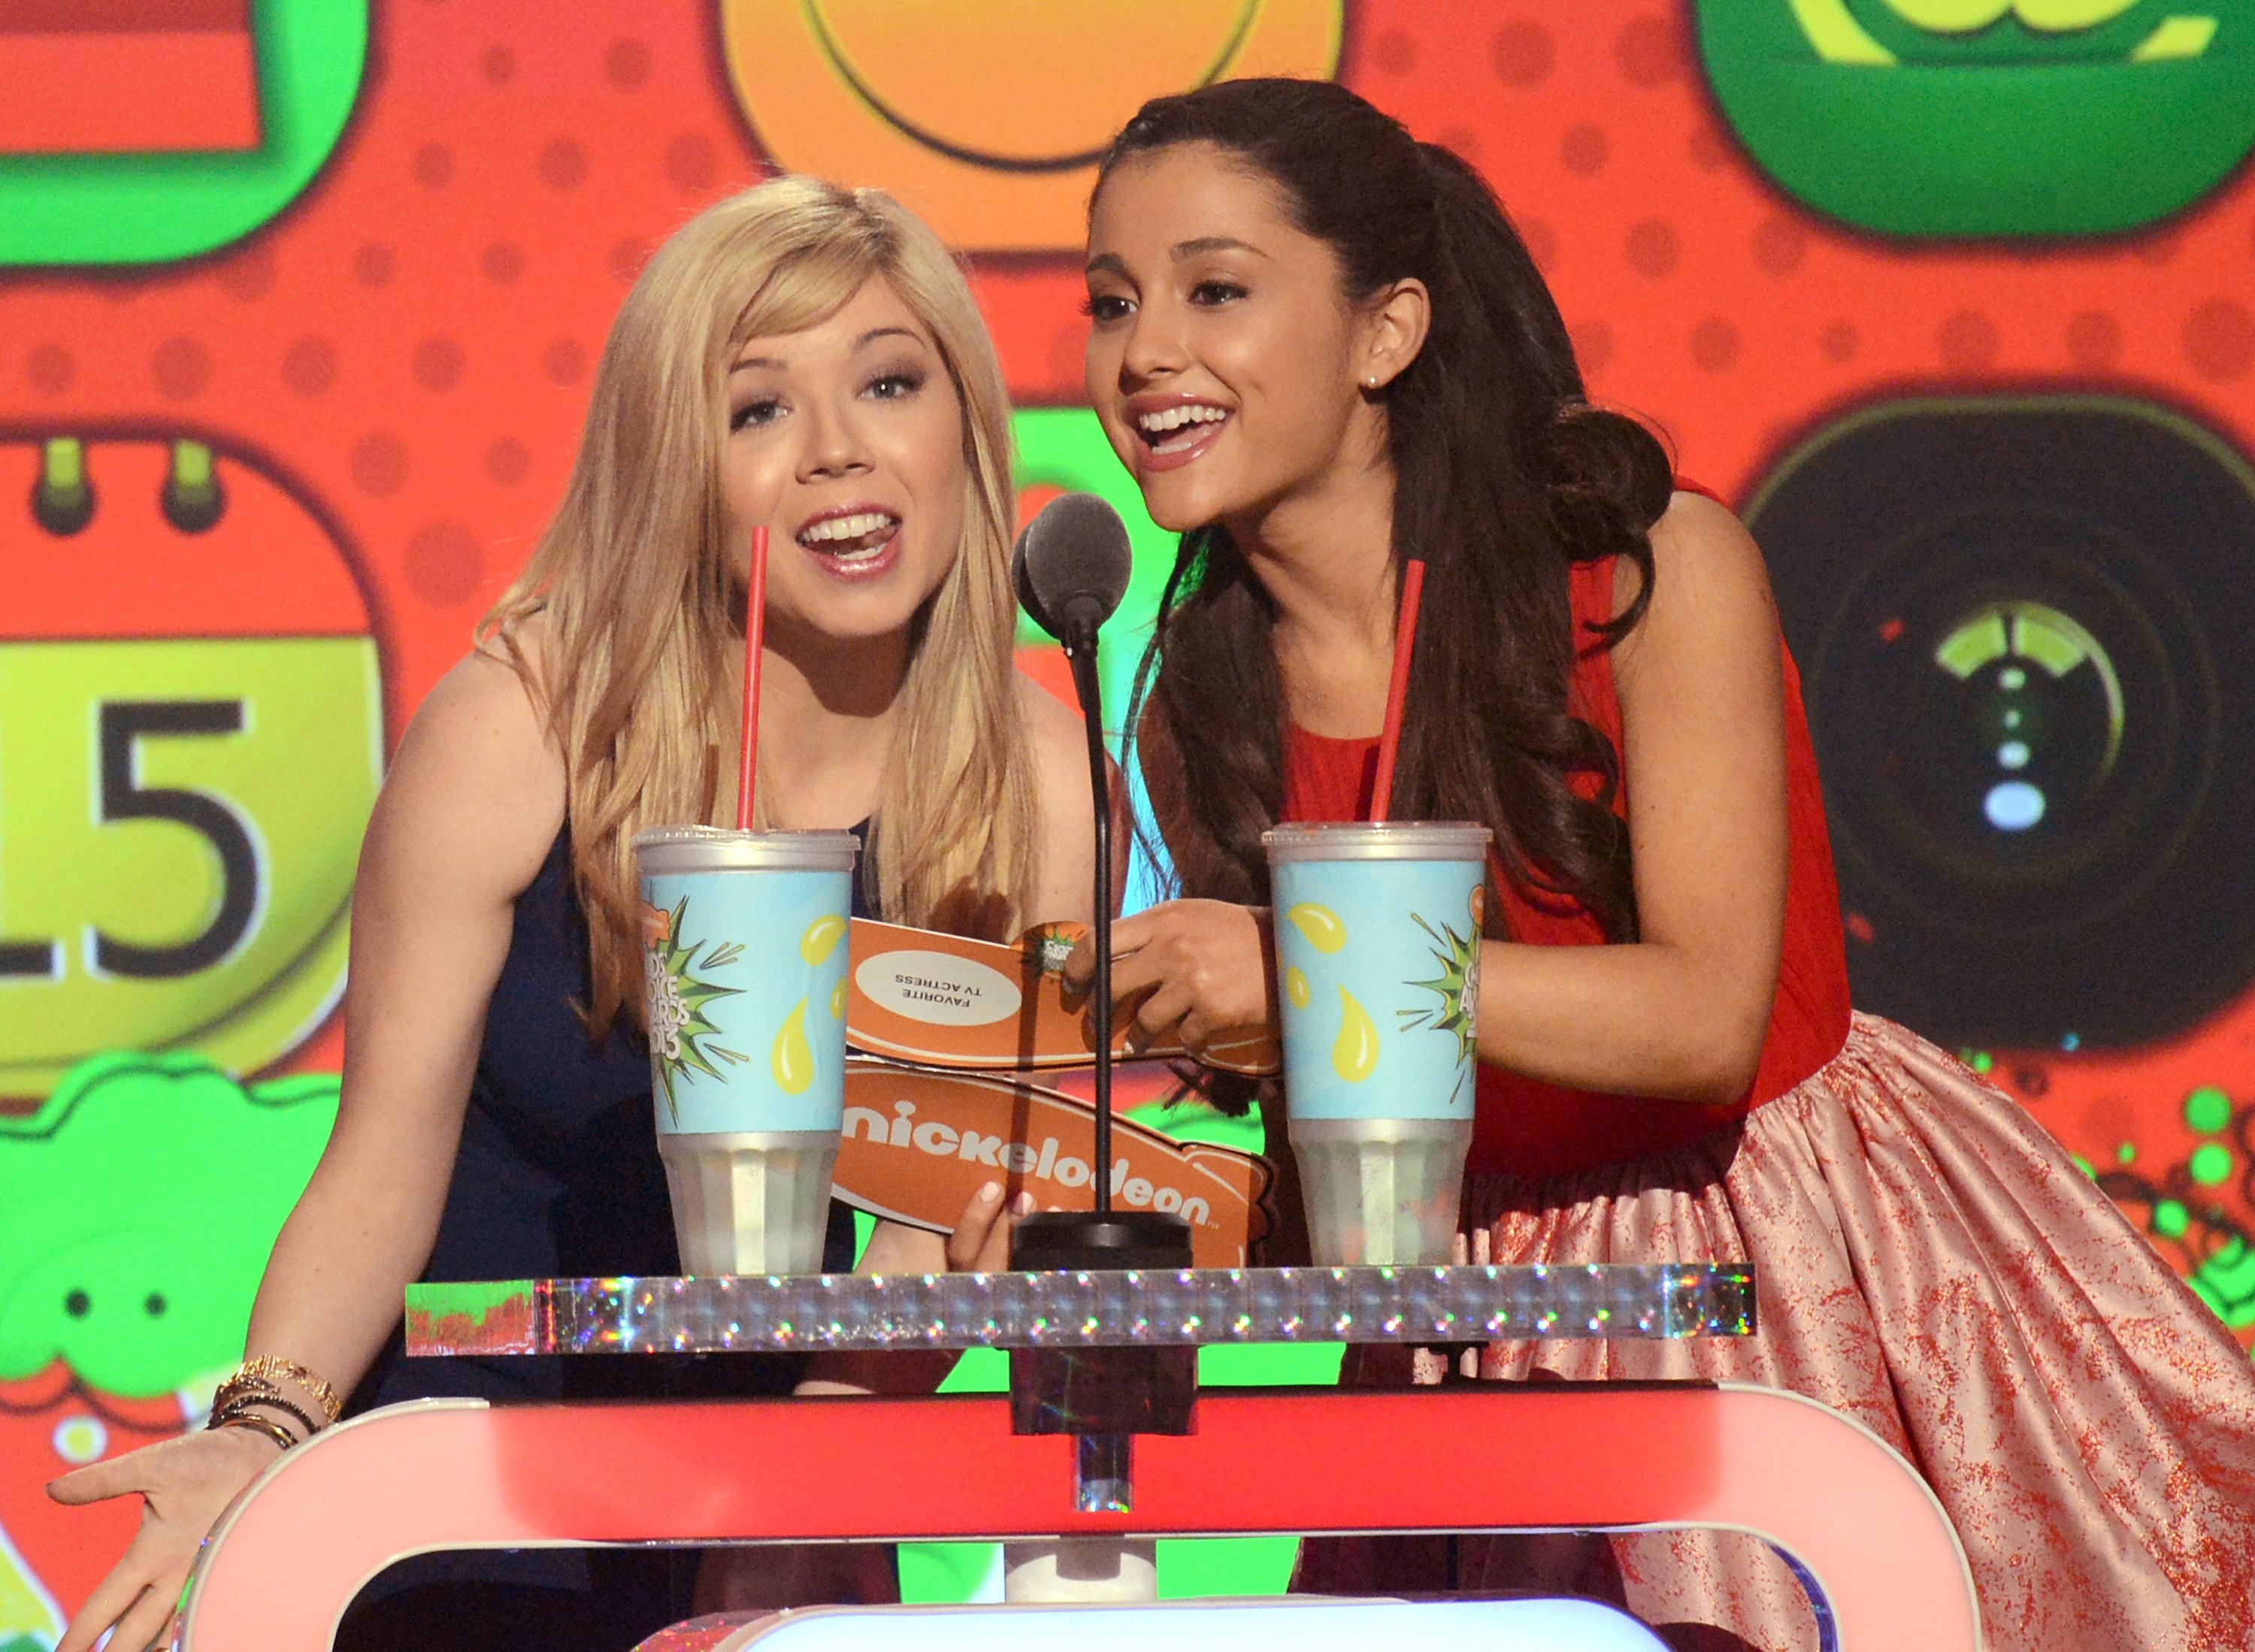 Actors Jennette McCurdy and Ariana Grande at Nickelodeon's 26th Annual Kids' Choice Awards